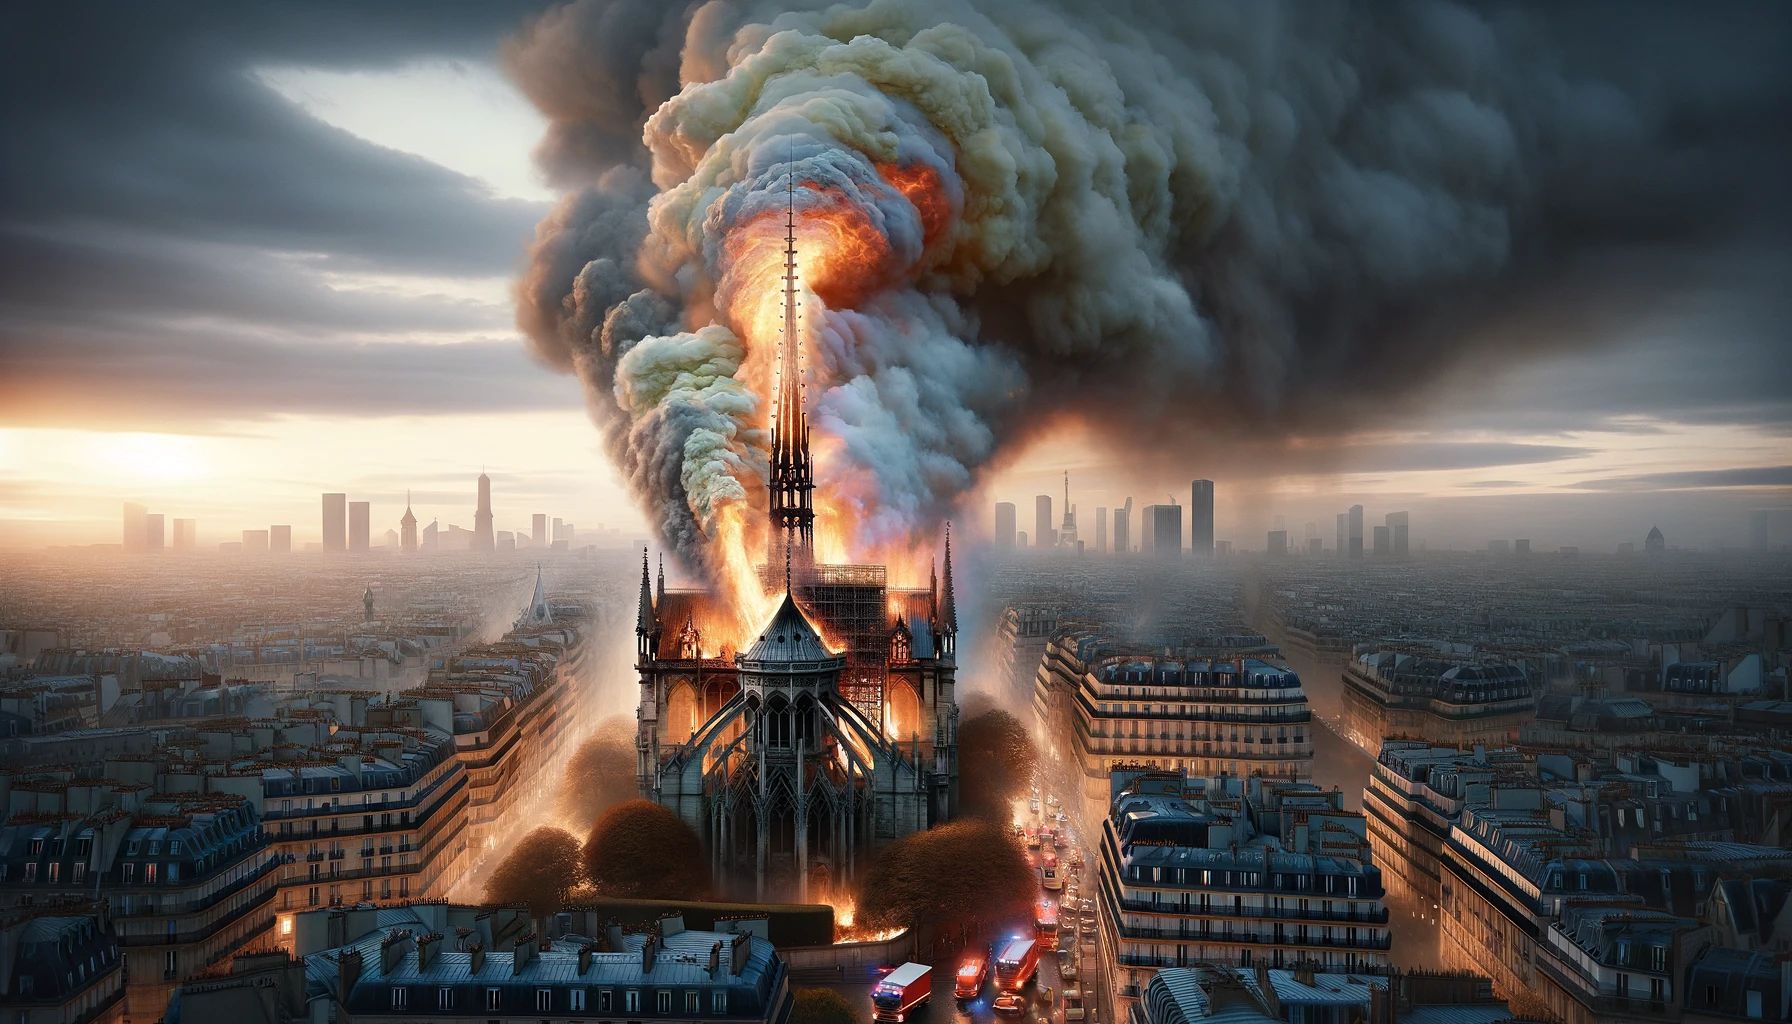 When Was The Fire At Notre Dame Cathedral In Paris